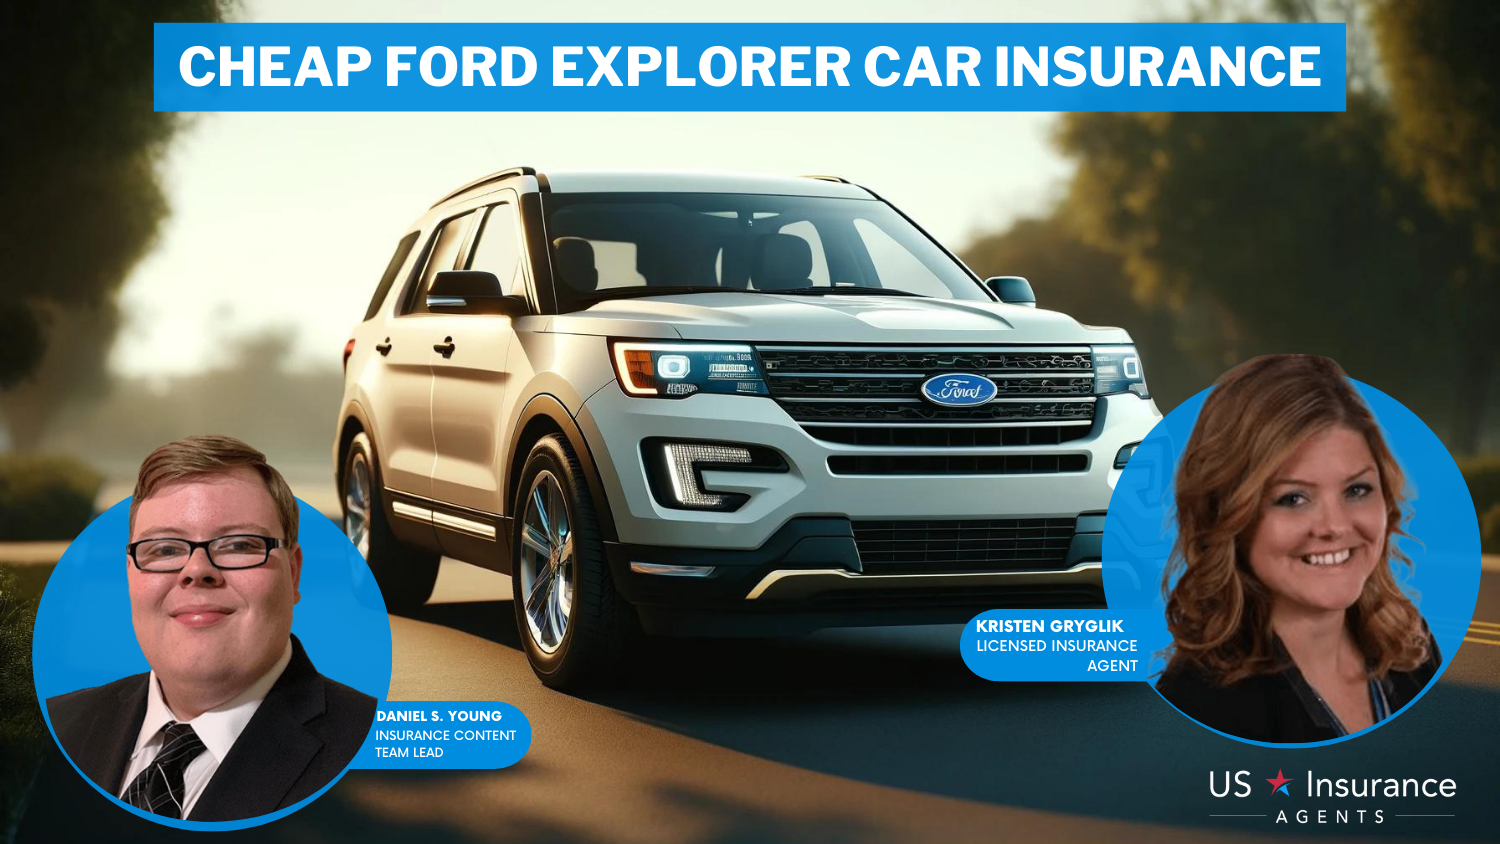 Cheap Ford Explorer Car Insurance: Erie, USAA, and State Farm